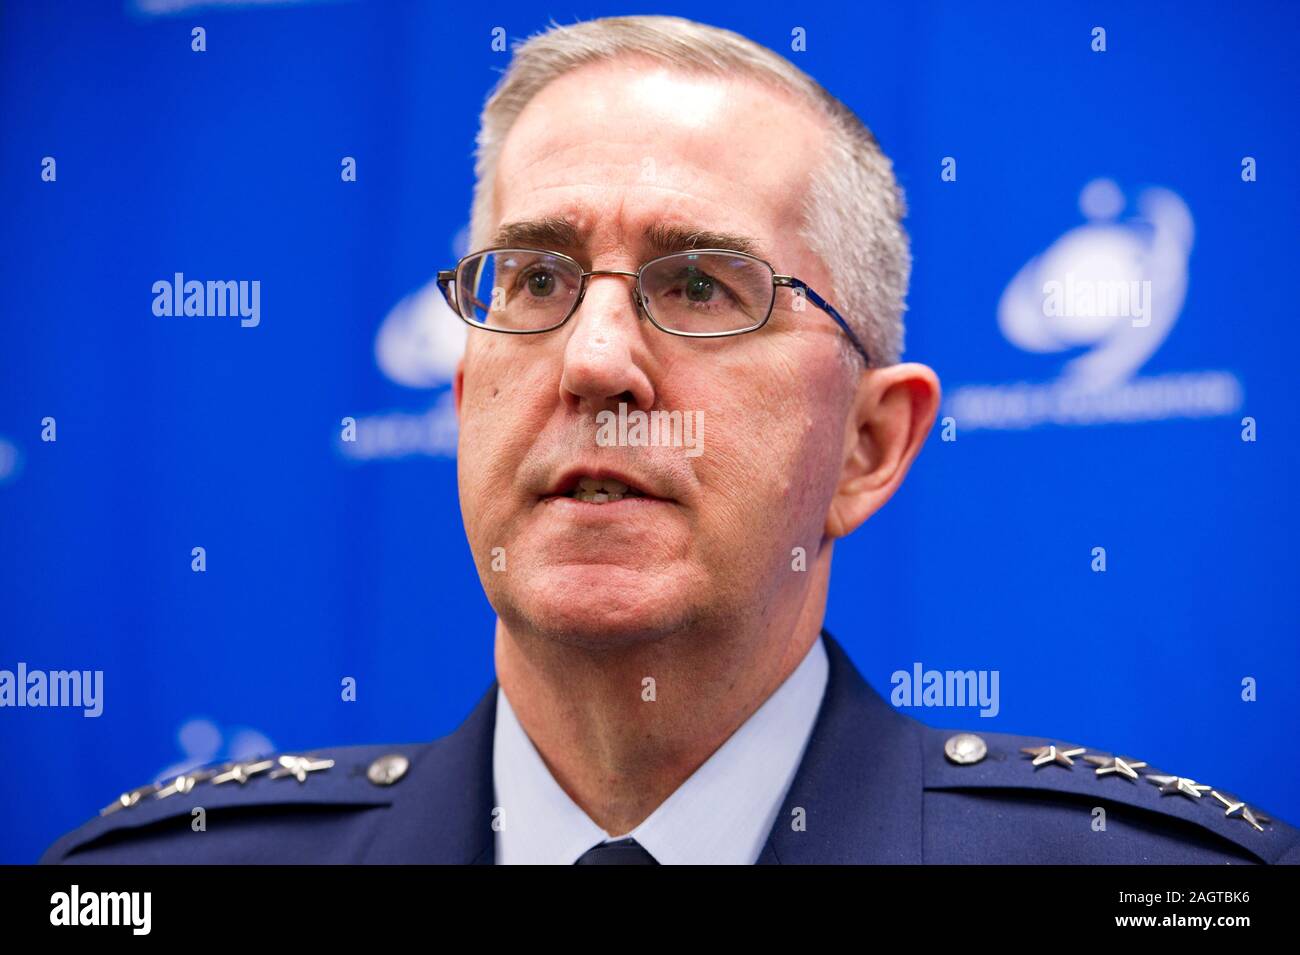 US Air Force General and Vice-Chairman of the Joint Chiefs of Staff John Hyten speaks during a press conference about space at the 2019 Space Symposium in Colorado Springs USA. Stock Photo